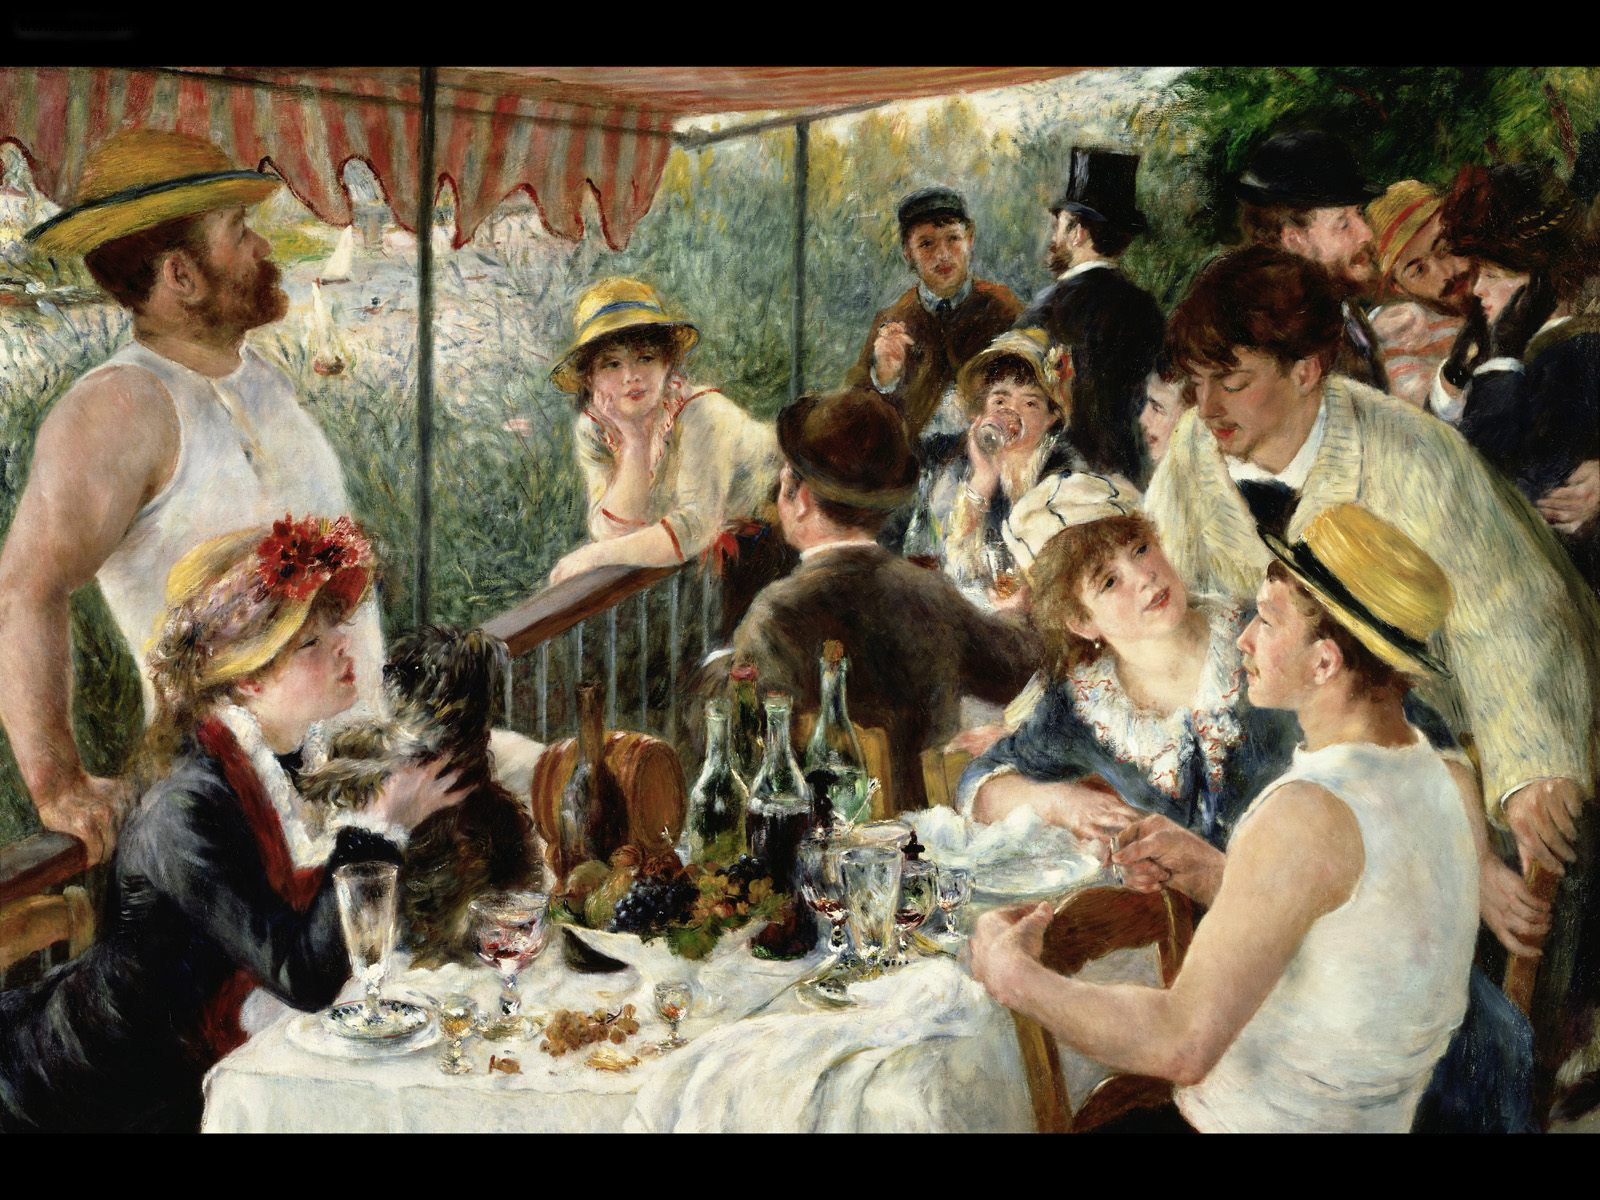 AMazon coloring books for adults: Boating Party - Renoir